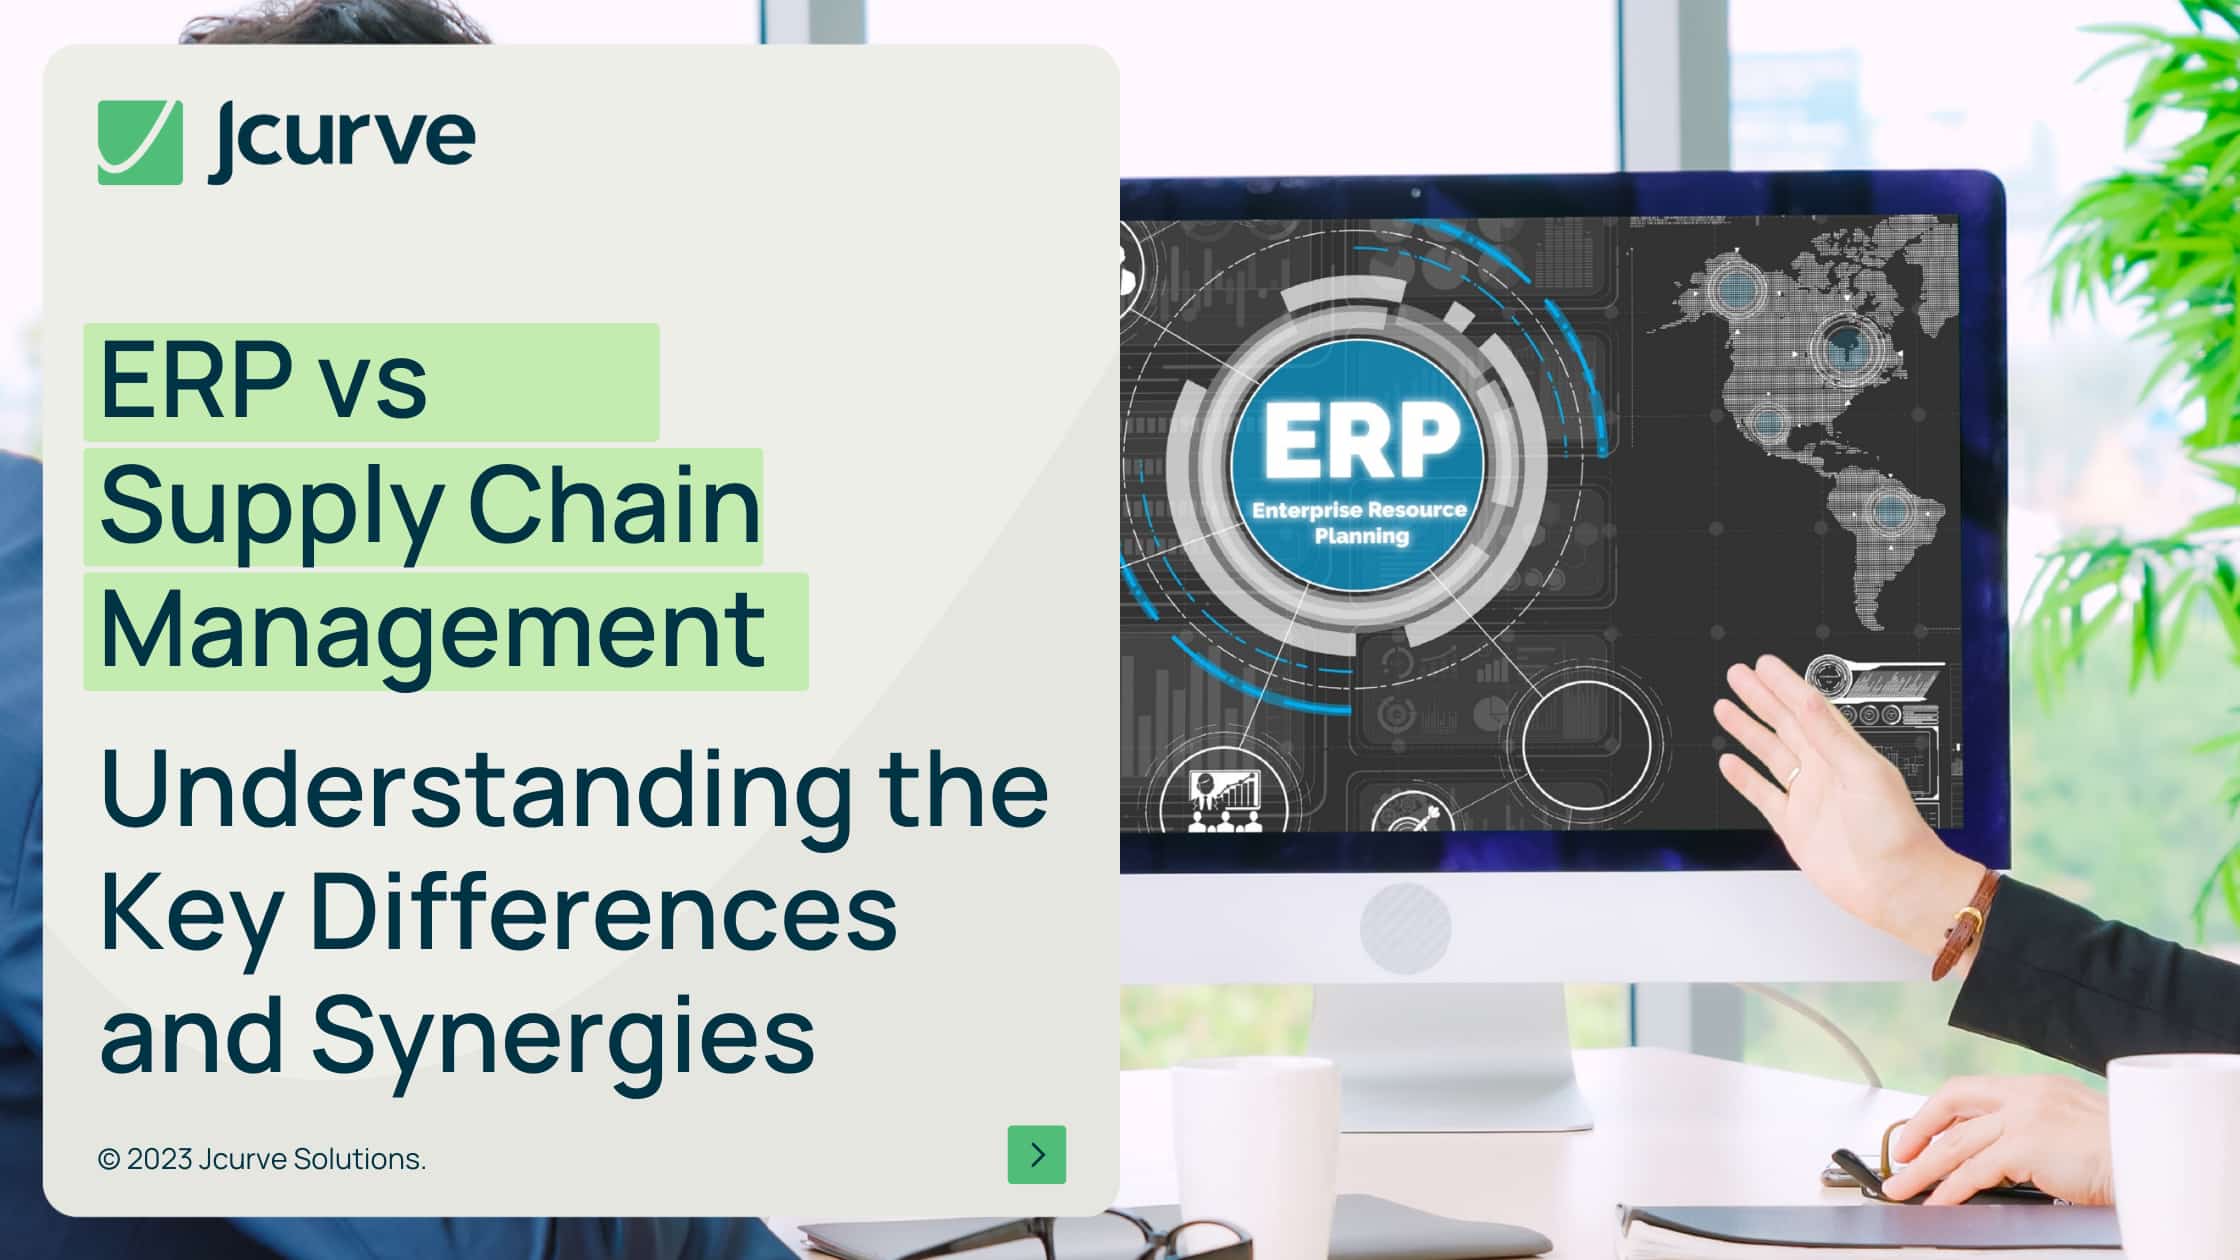 ERP vs Supply Chain Management: Understanding the Key Differences and Synergies